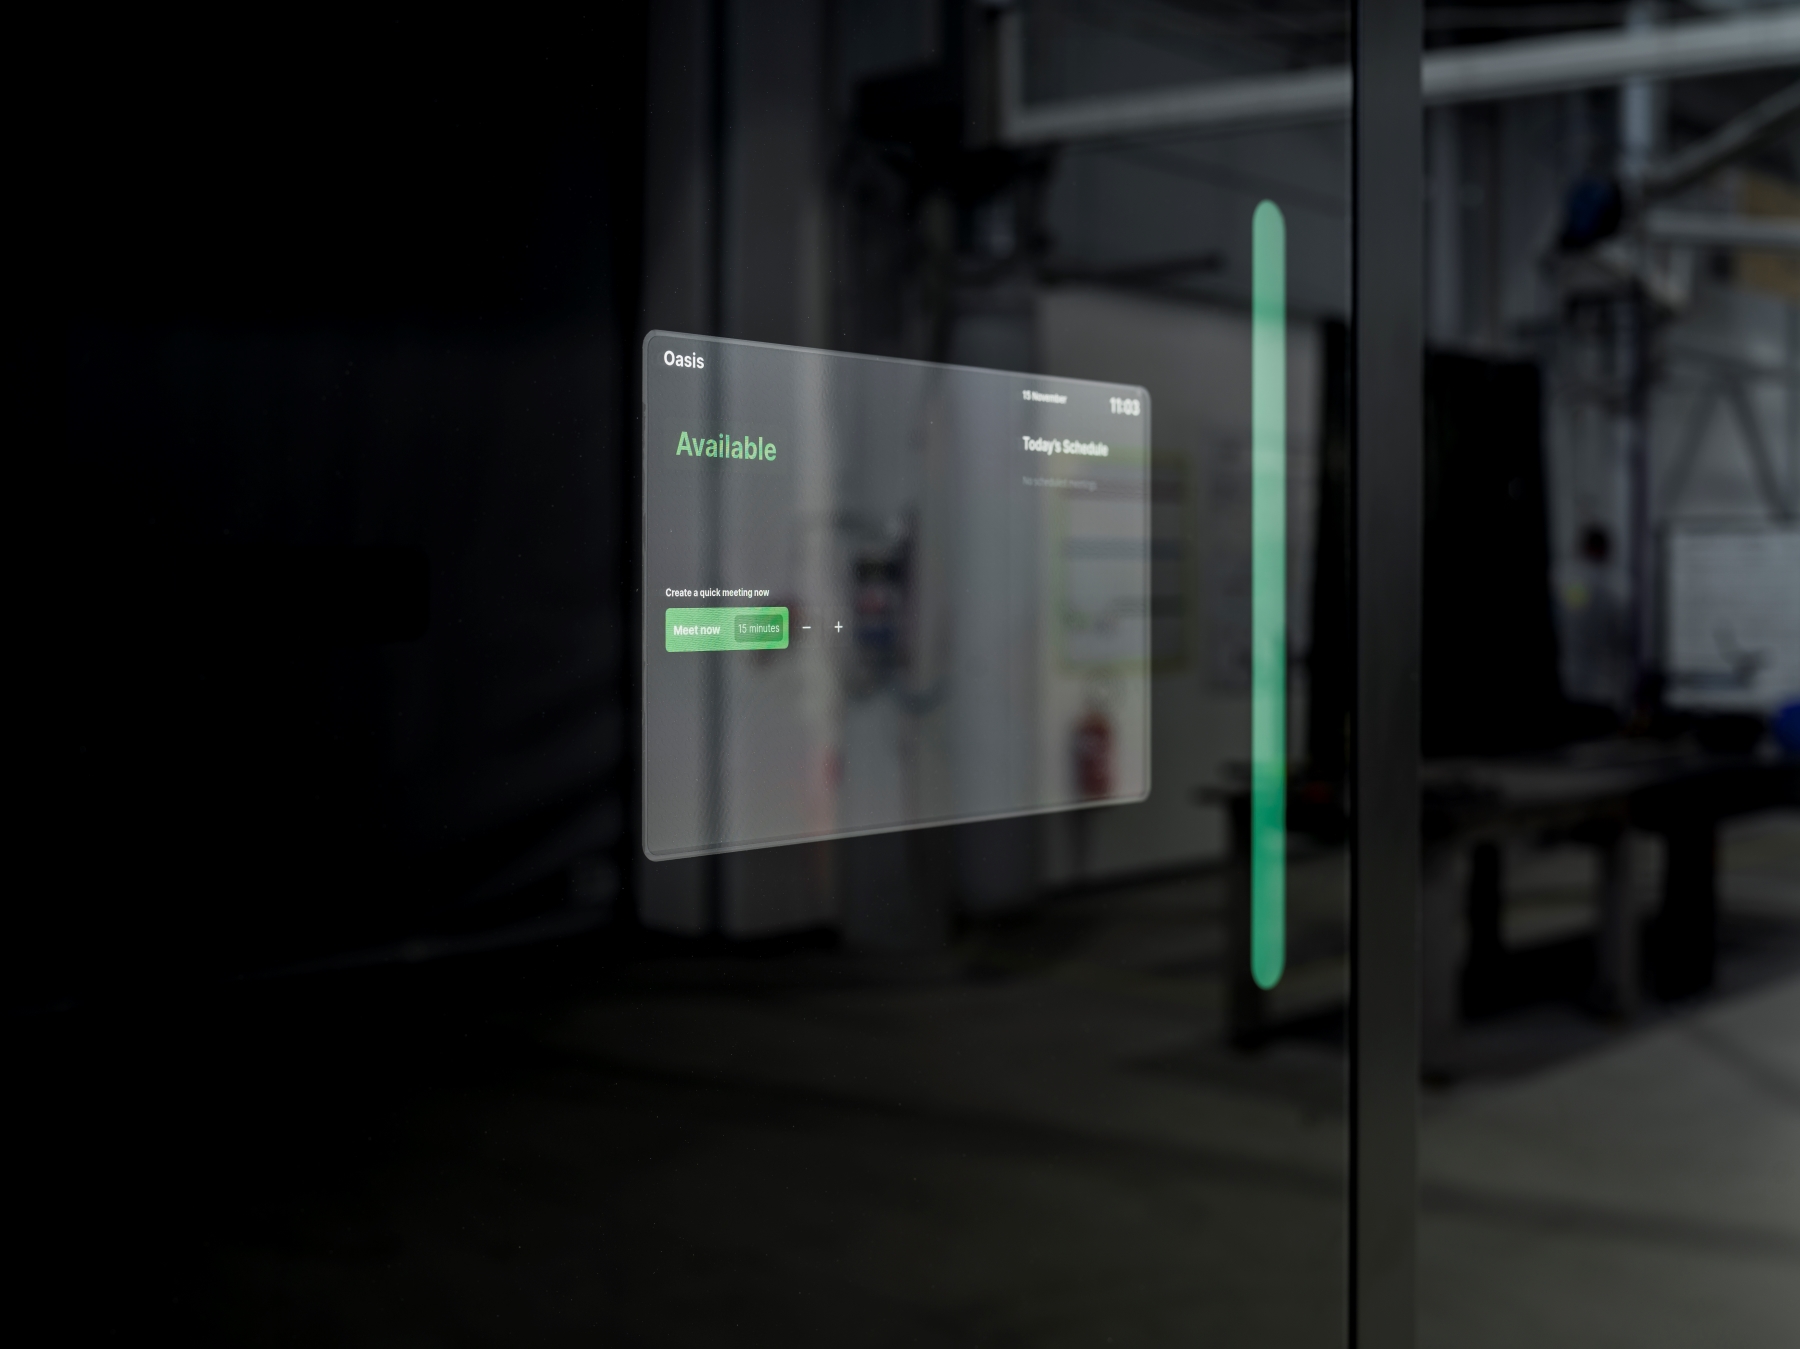 The control panel is fully built into the all-glass door.